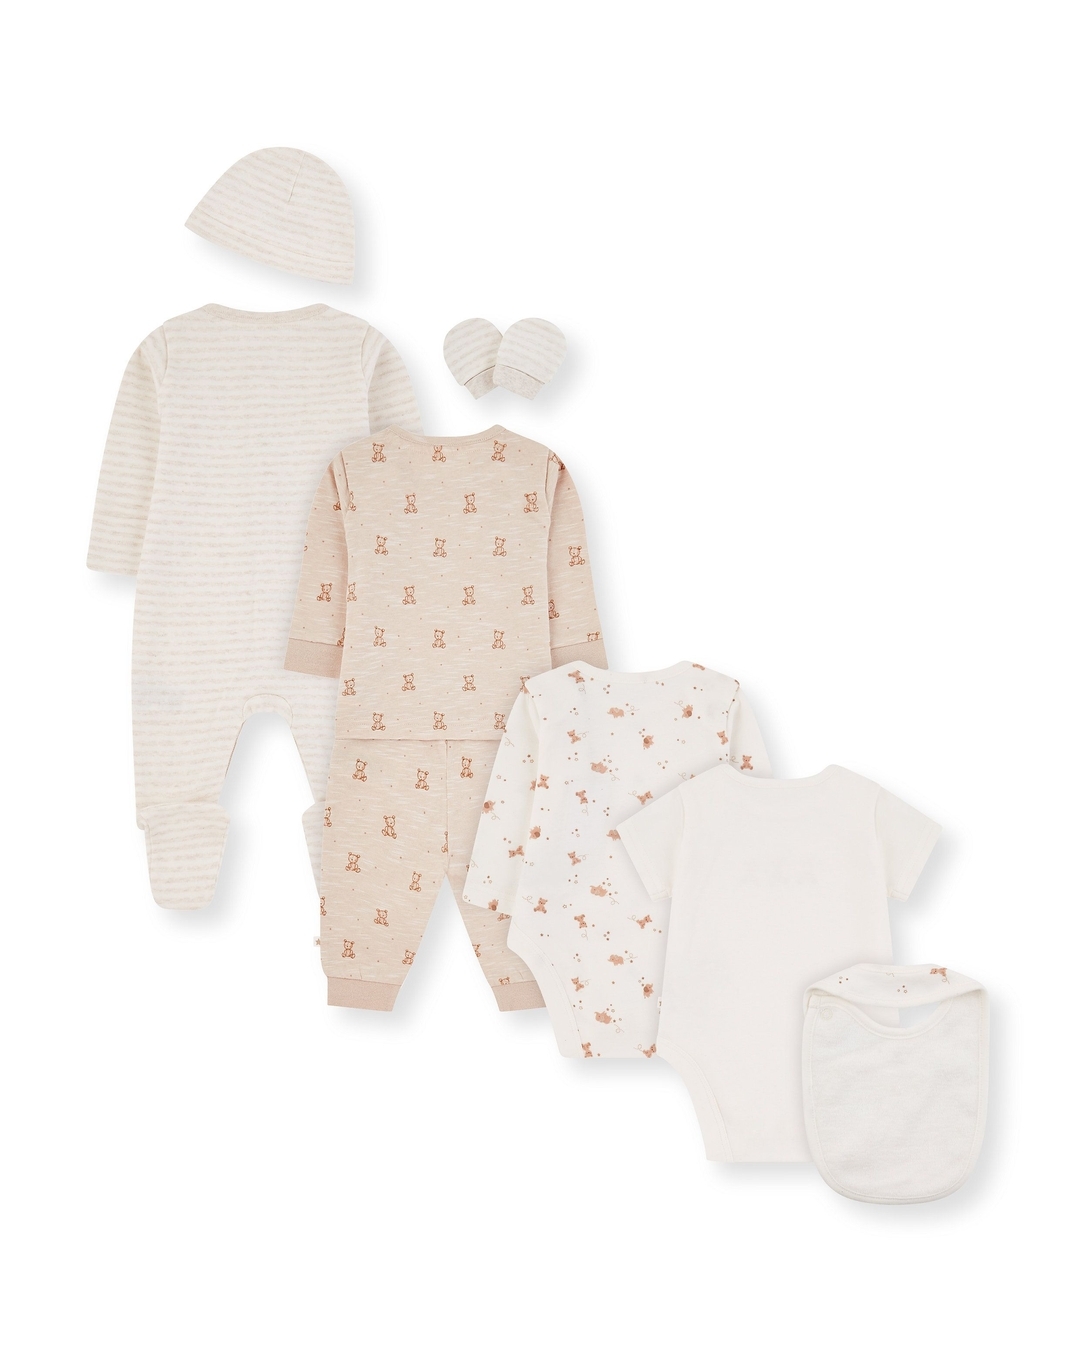 Bliss - Our partner Mothercare have released a new premature baby clothing  range! We're so proud to have been involved in the creation of this line  that was based on feedback from